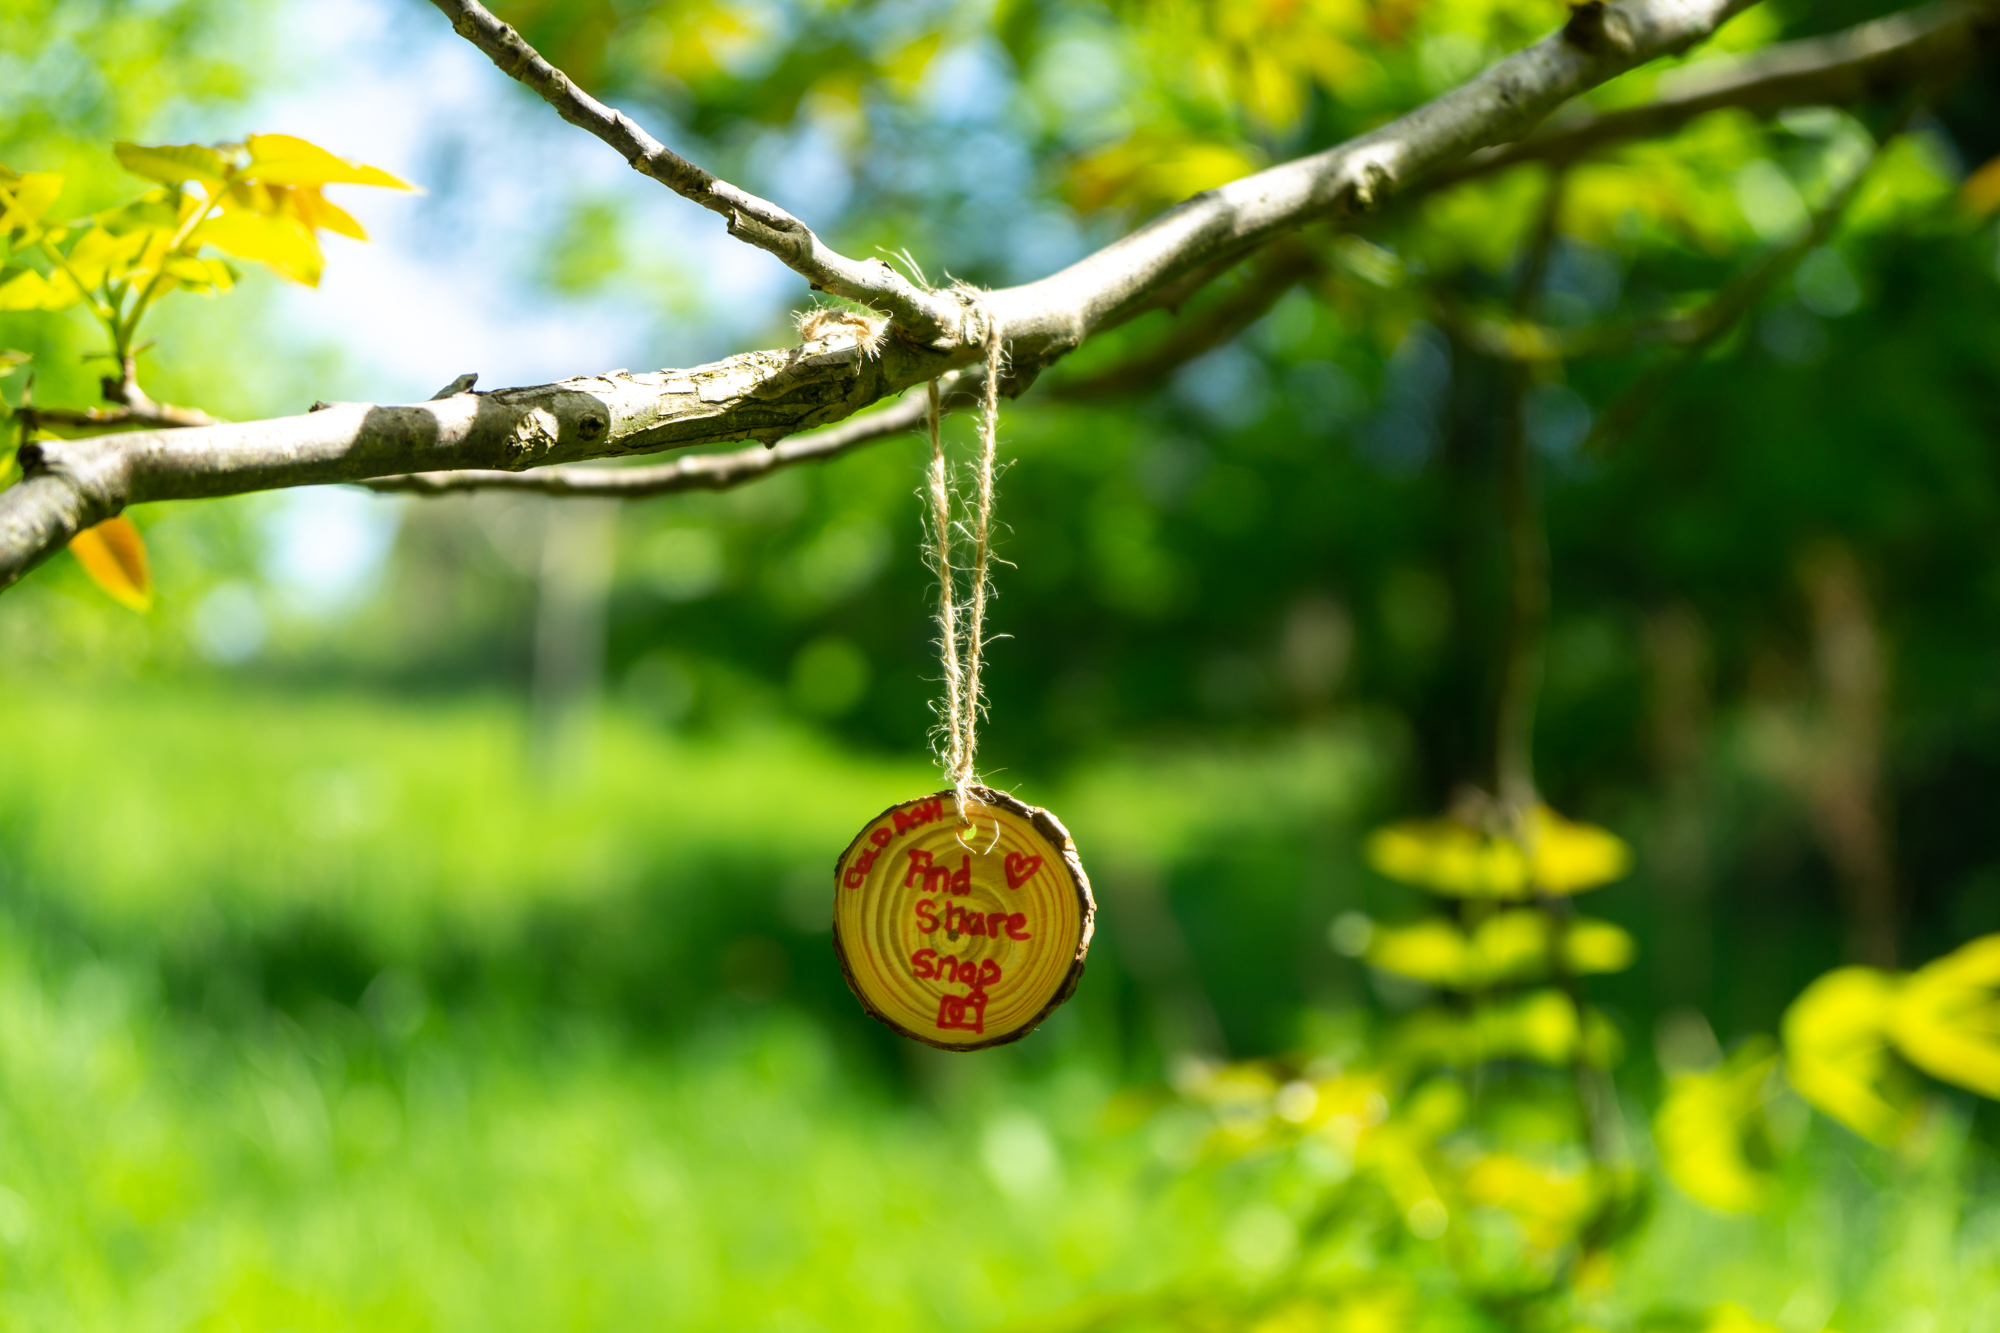 A small wooden disc is hanging from a tree. Children's writing on the disc says "Cold Ash, And Share a Snap". There is also a drawing of a camera on the disc.